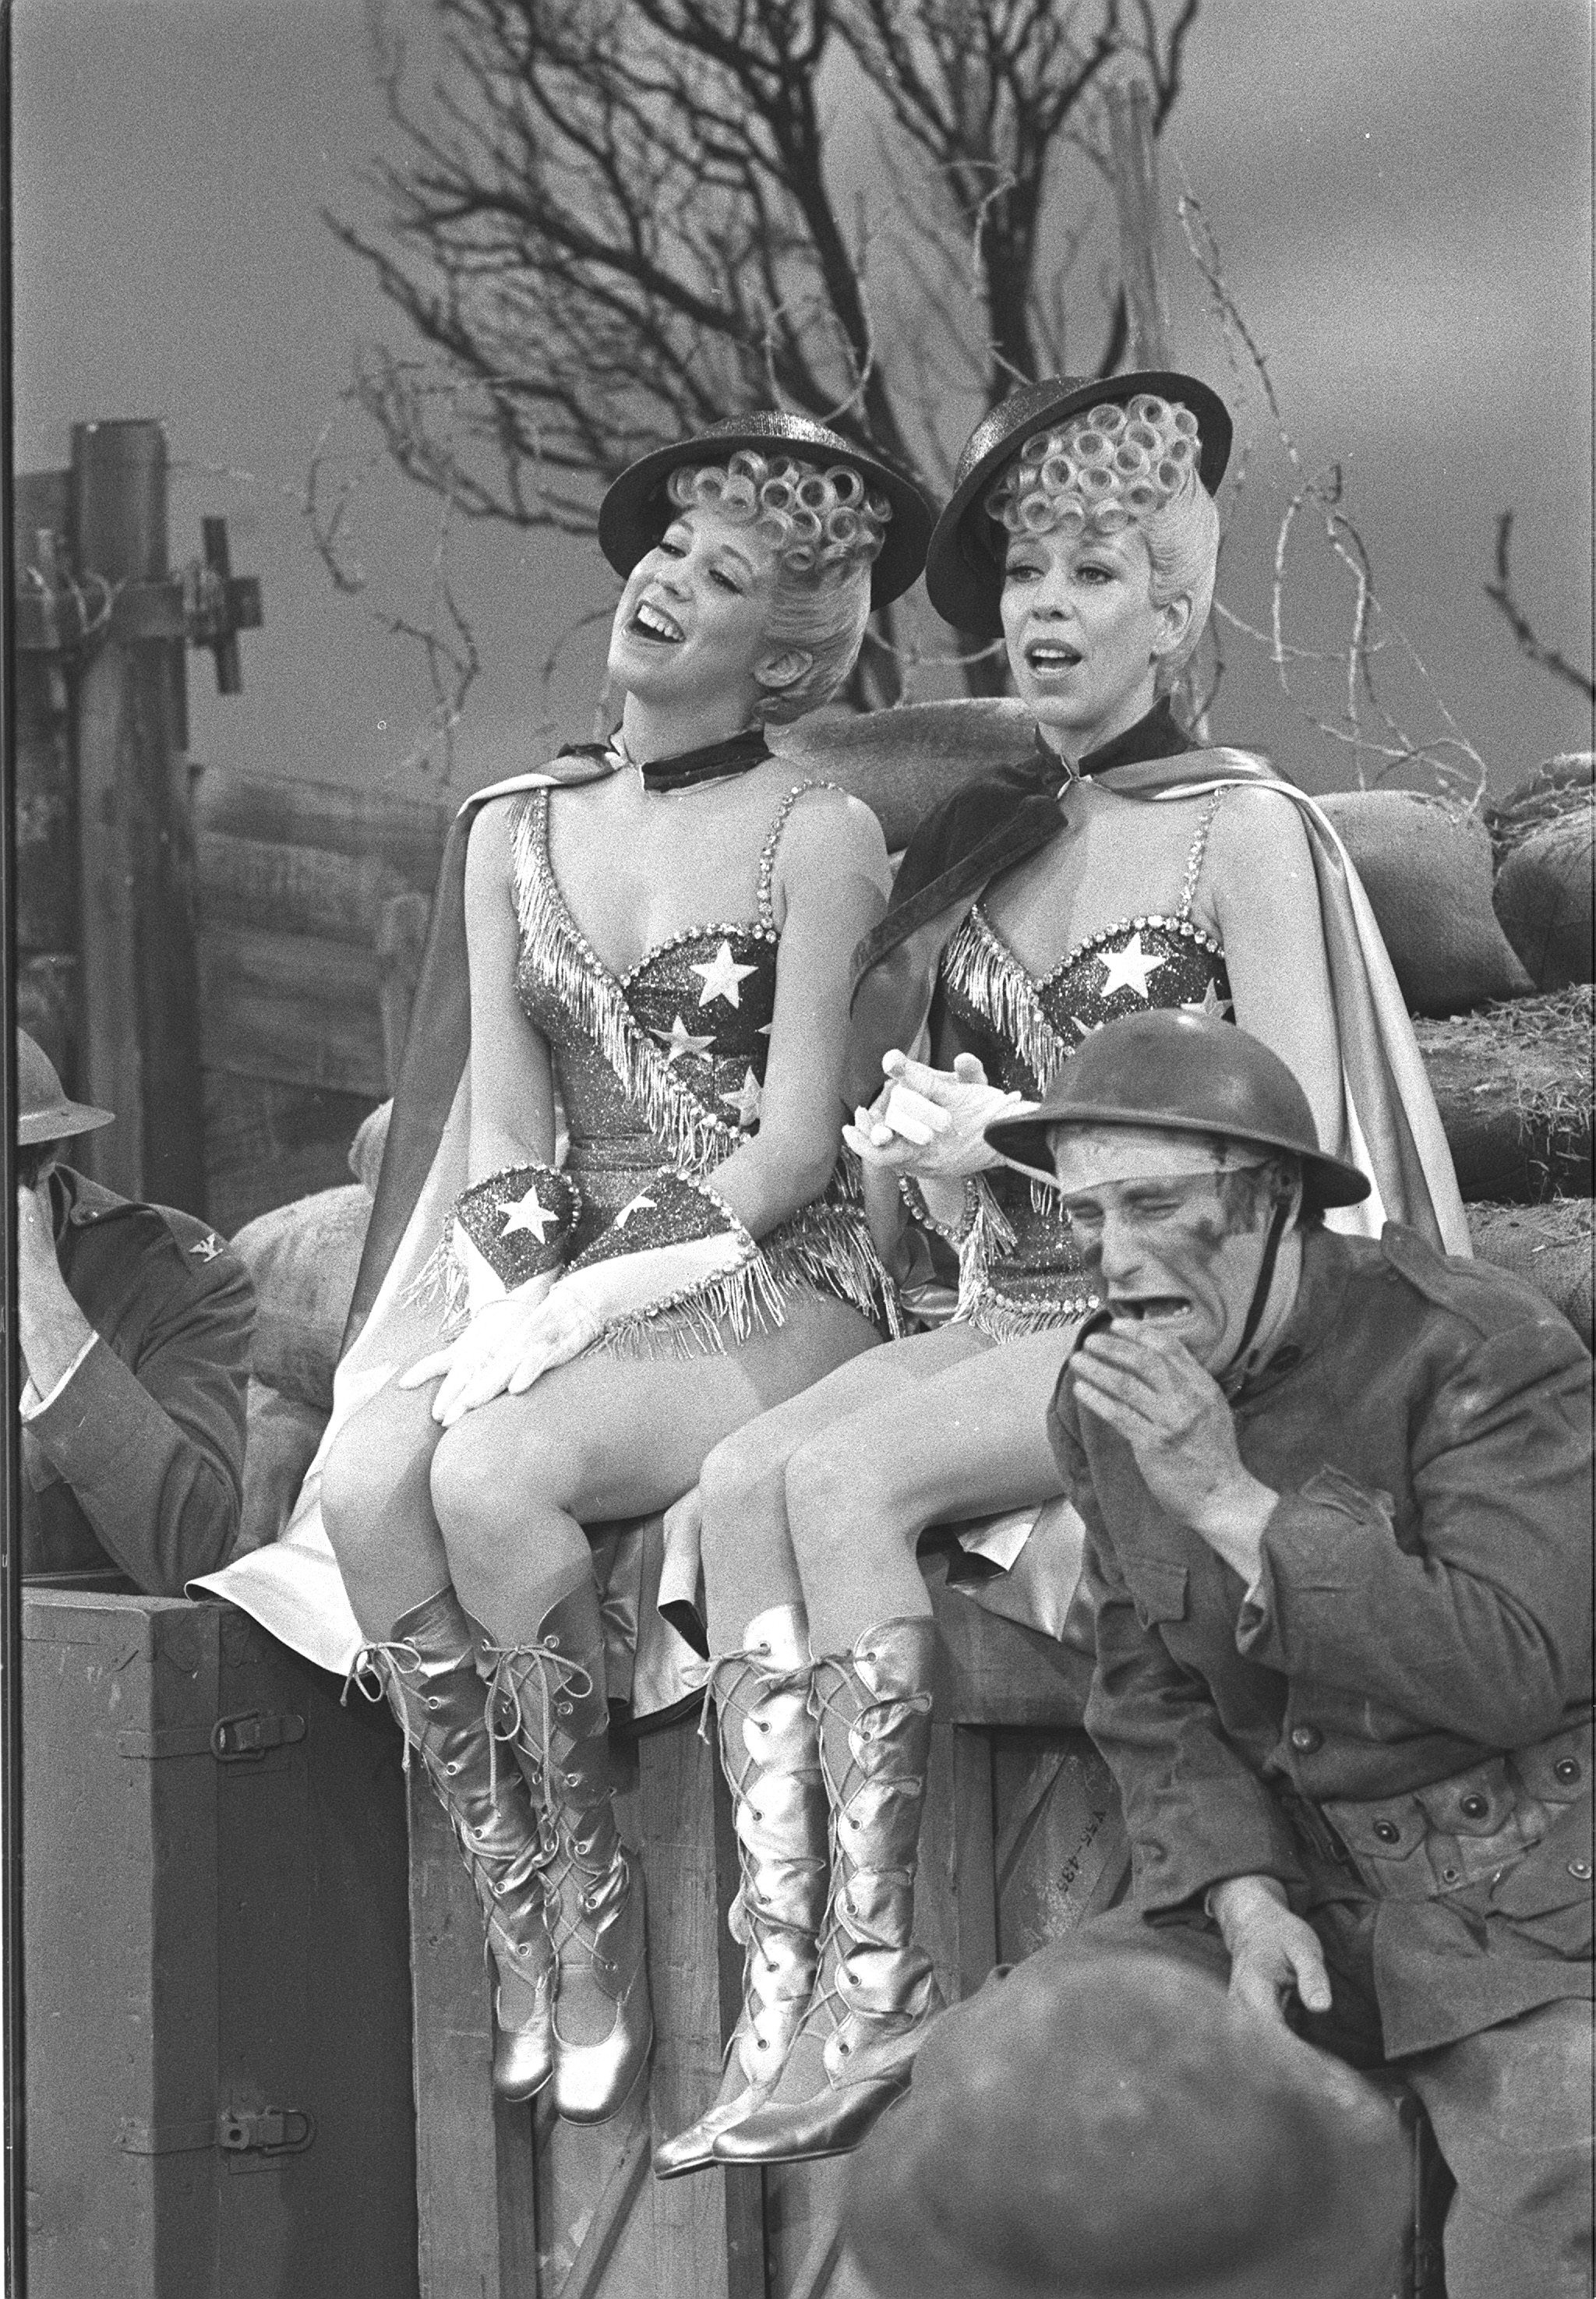 Vicki Lawrence and Carol Burnett sing in costume in 'The Dolly Sisters' skit, in the television comedy variety series, 'The Carol Burnett Show' in March 1972. | Source: Getty Images